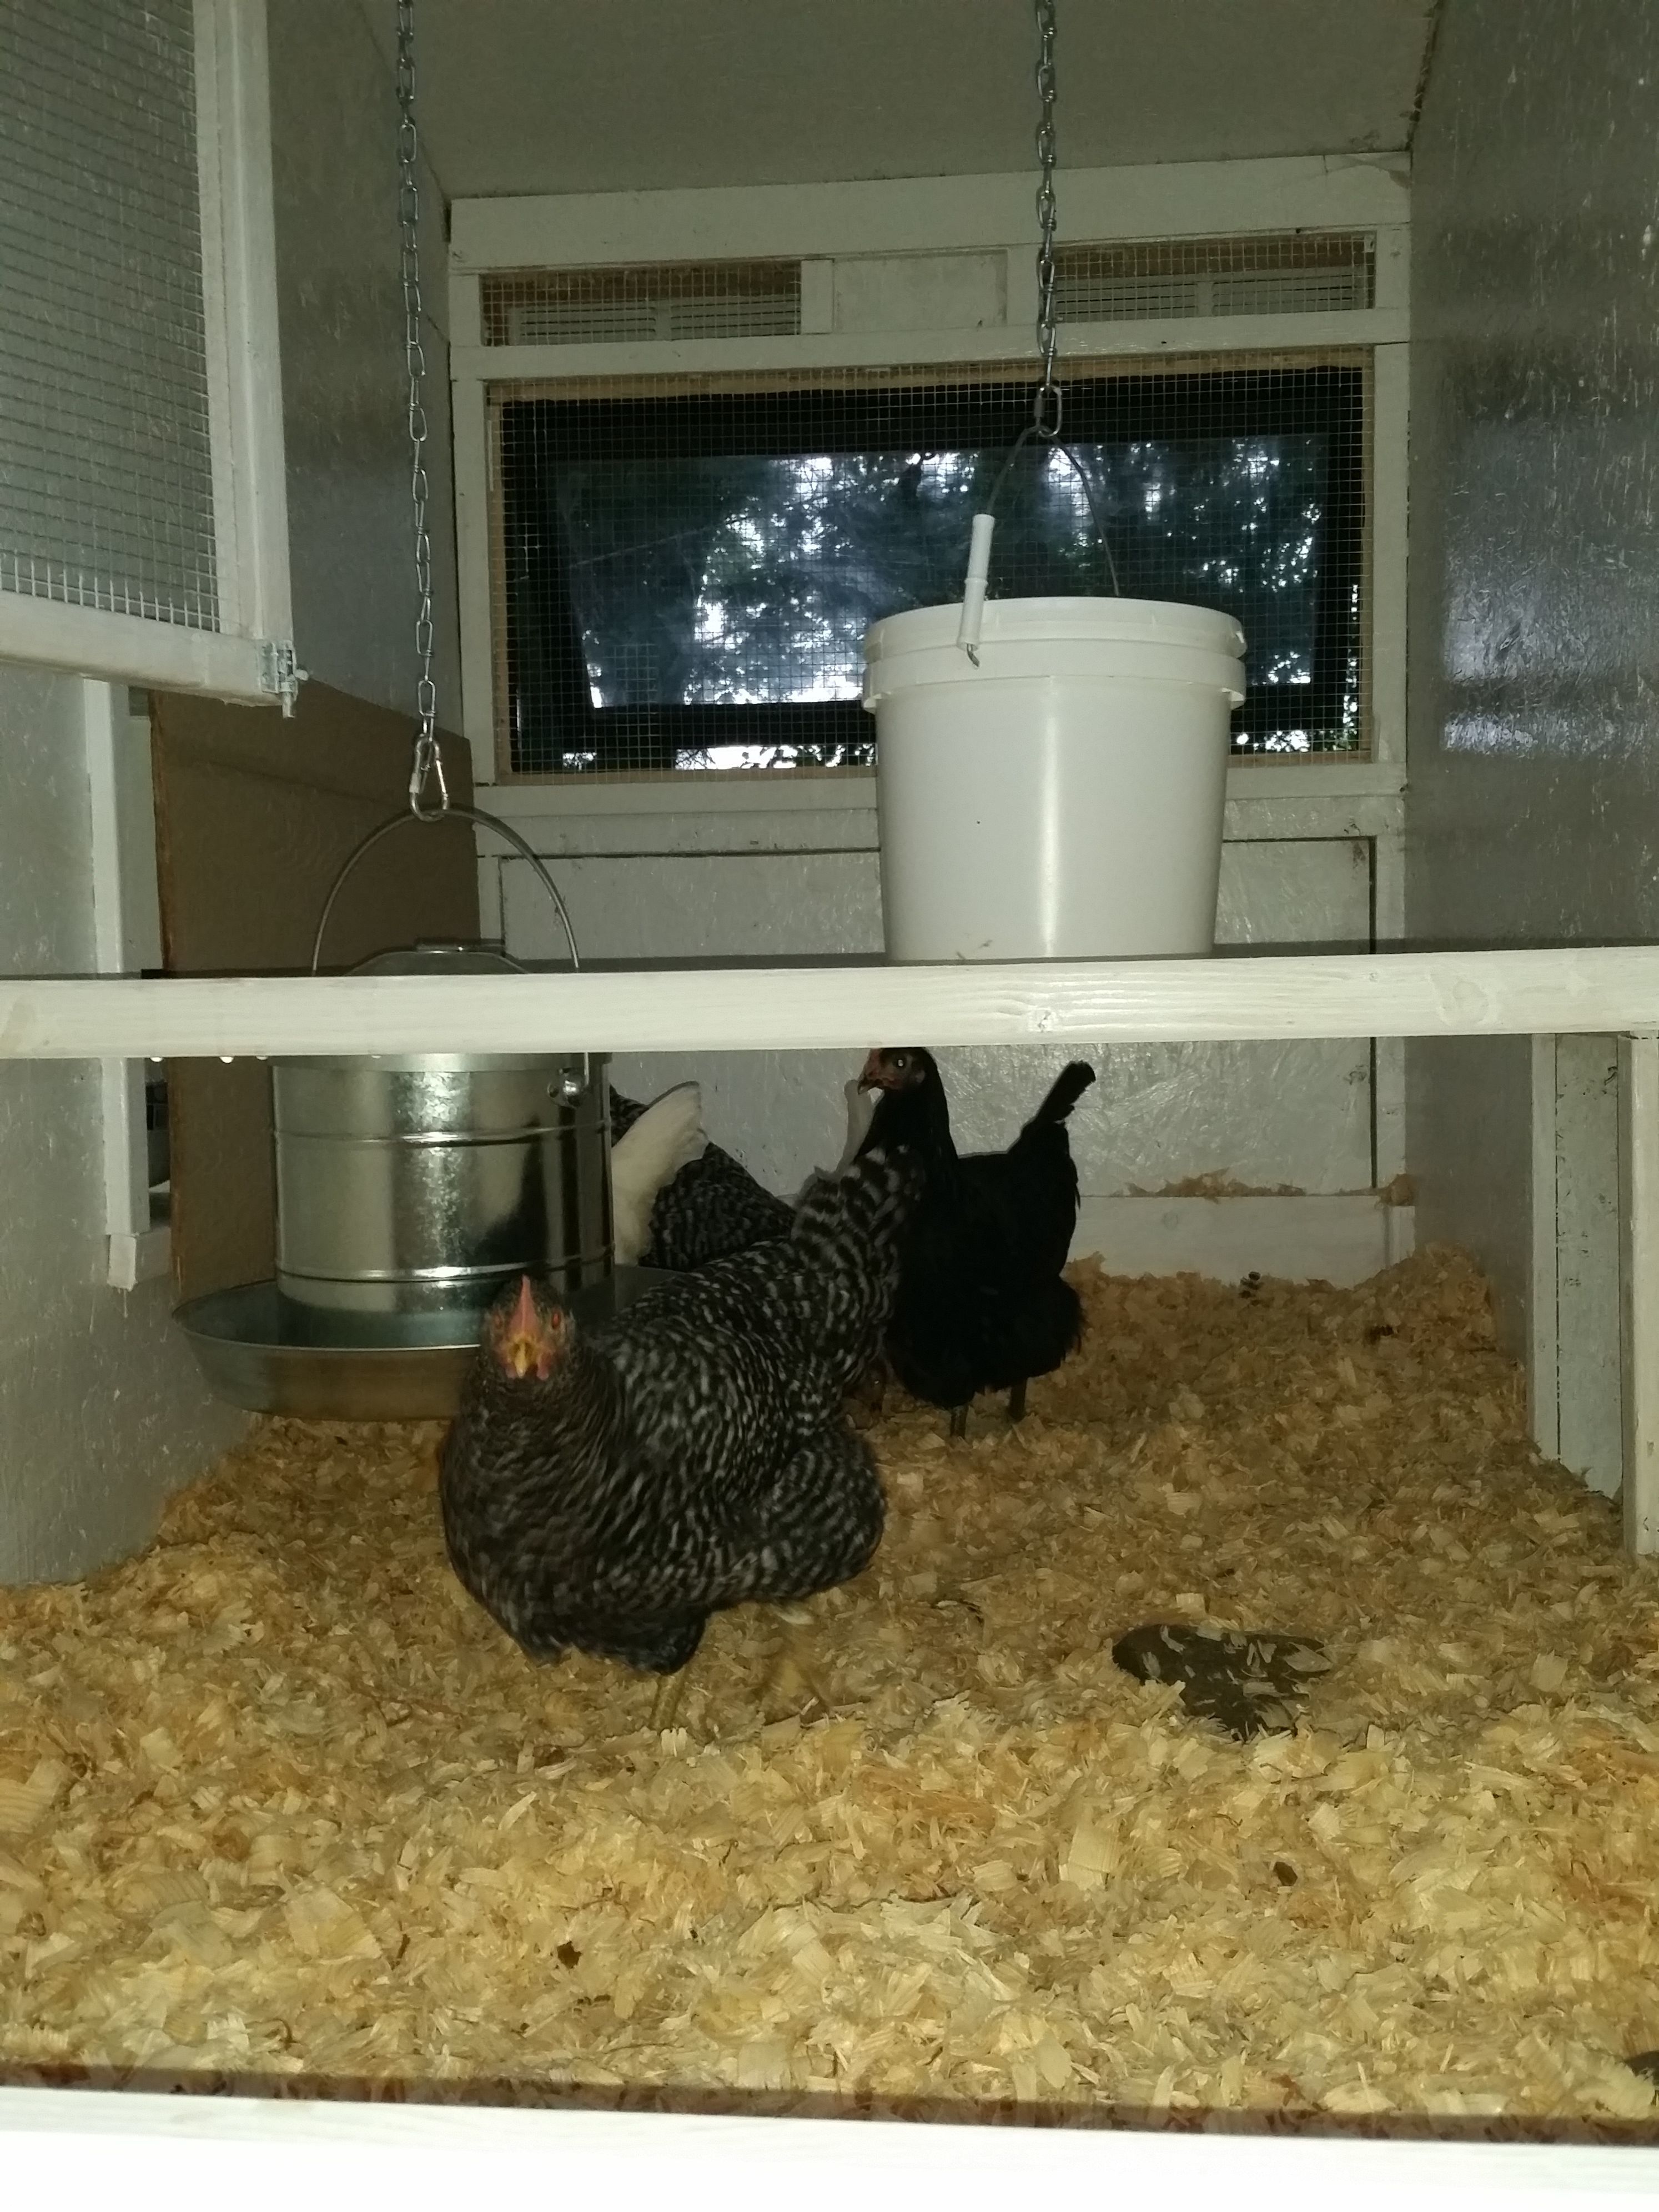 The girls exploring their new home.  We kept the nesting boxes covered for the first week to make sure they didn't start to think they were for sleeping at night.  The low roost is visible here, but the high roost that lets them look out the window is above the camera.